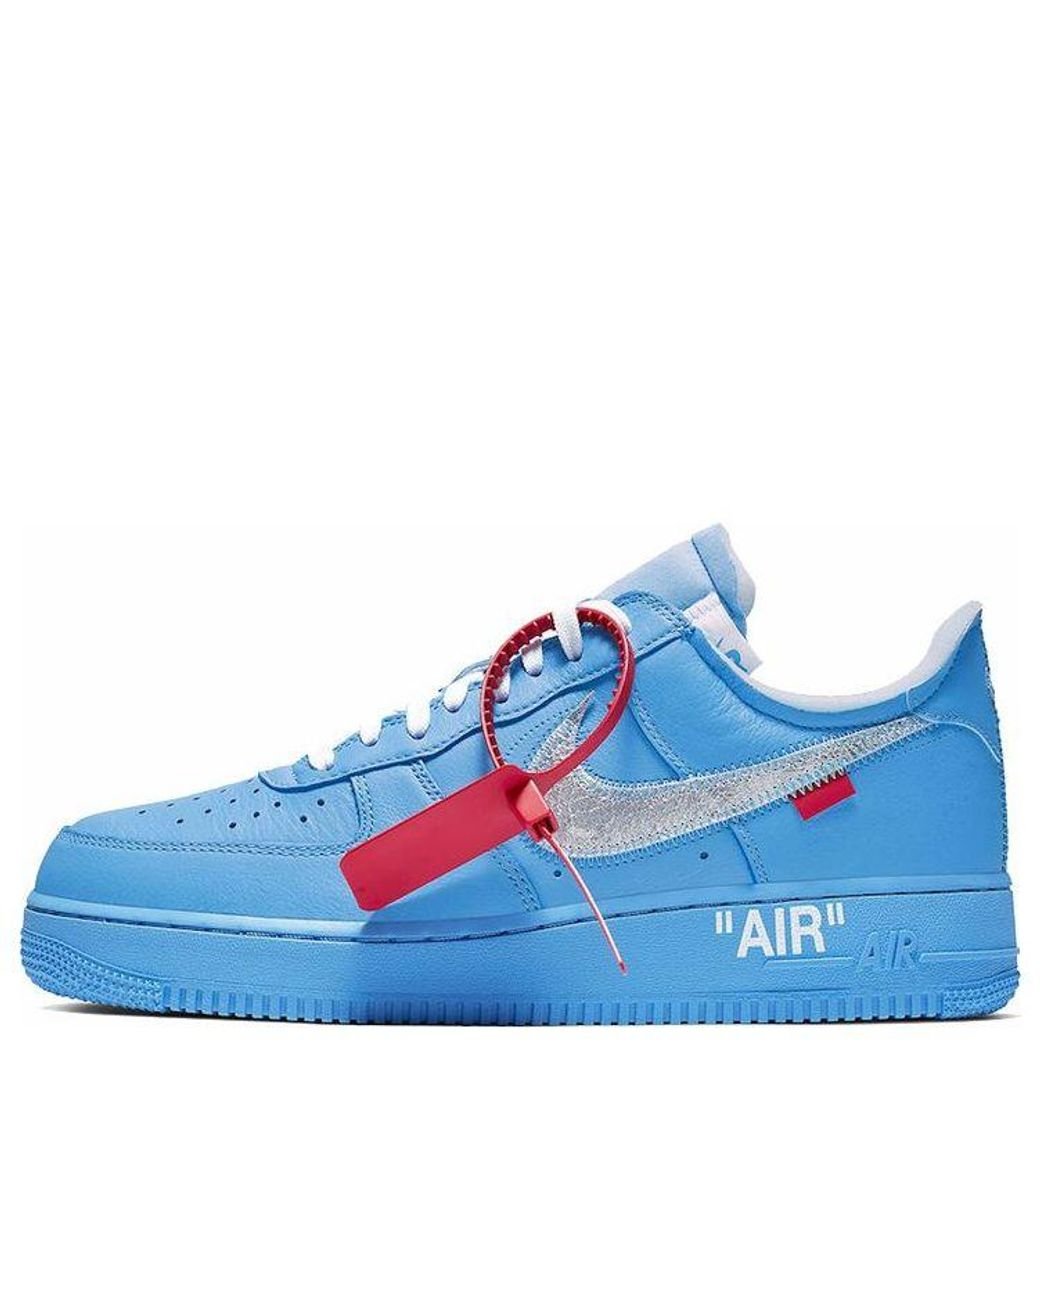 When Do You Think The OFF-WHITE x Nike Air Force 1 Low MCA Will